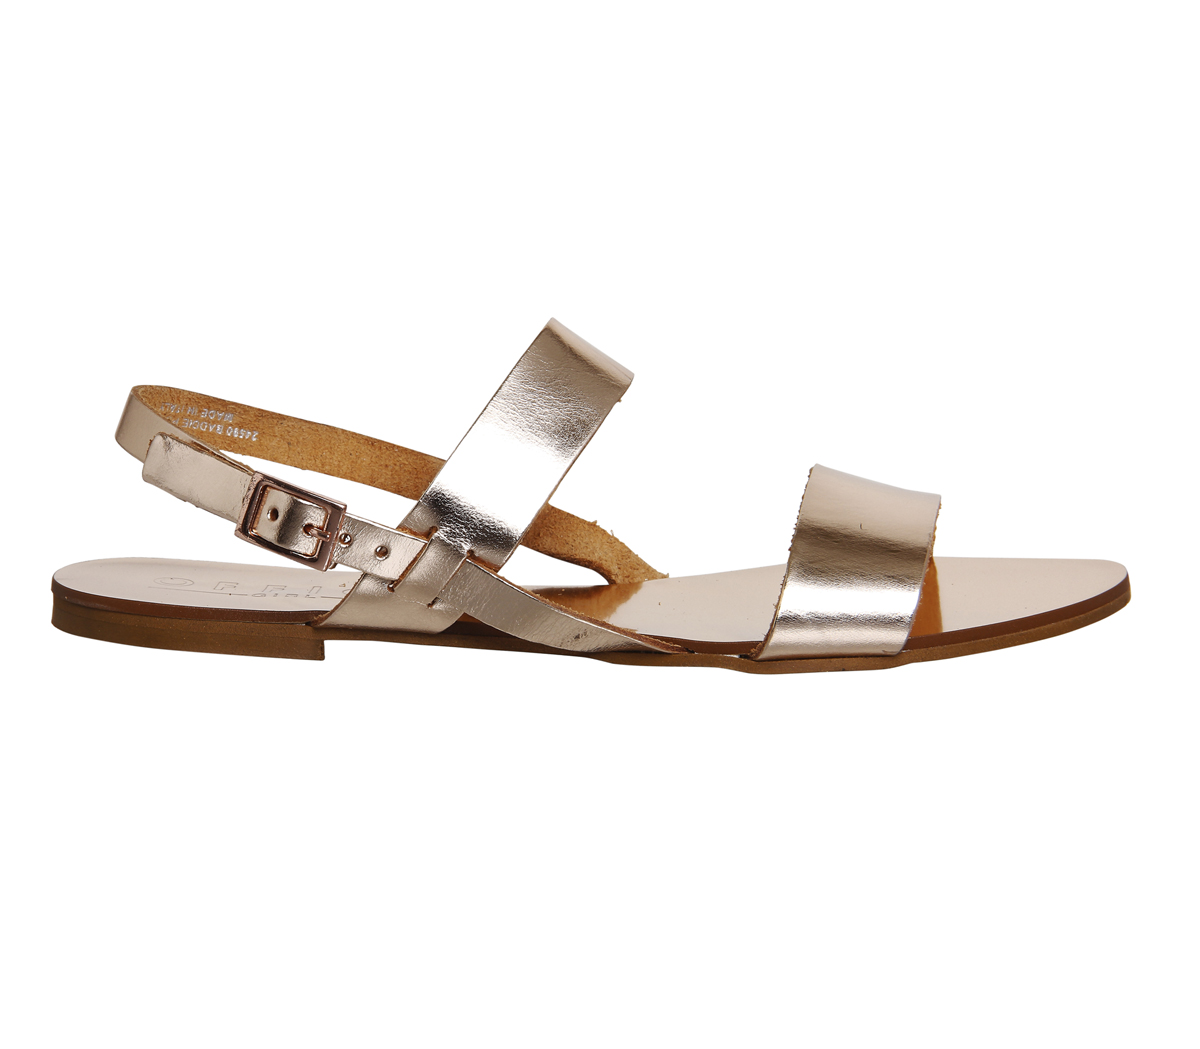 OFFICE Baddie Point Two Part Sandals Rose Gold Leather - Women’s Sandals